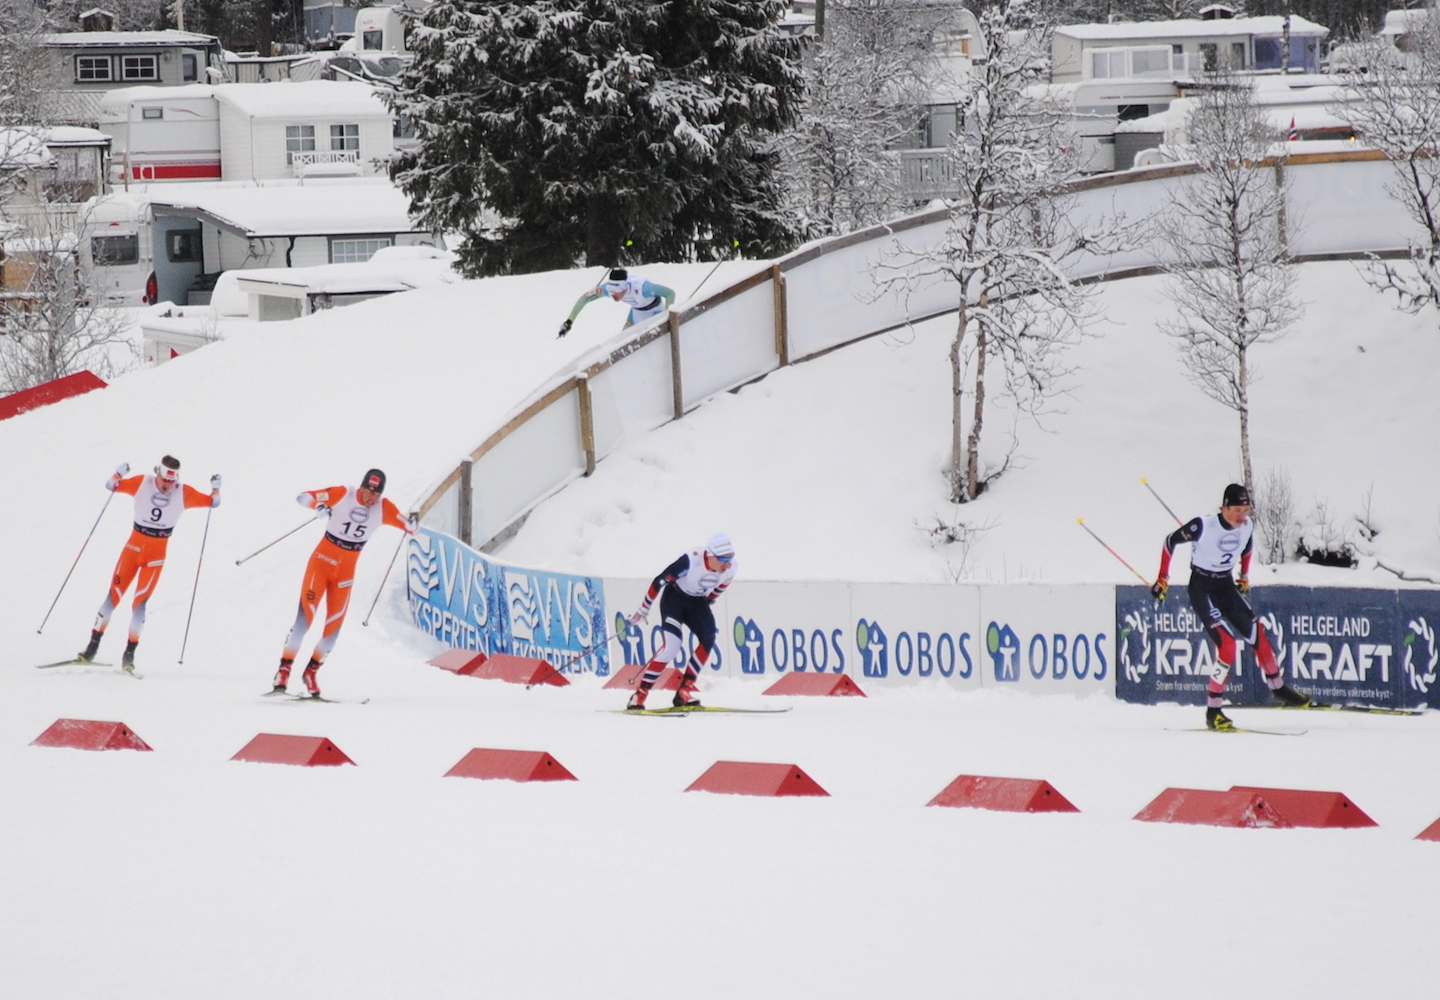 (From right to left) Johannes Høsflot Klæbo (Norwegian U23 Team) leading his heat with Finn Hågen Krogh, Even Northug and Kasper Stadaas on Sunday at the 1.7 k freestyle sprint FIS race in Beitostølen, Norway. (All photos: Aleks Tangen)